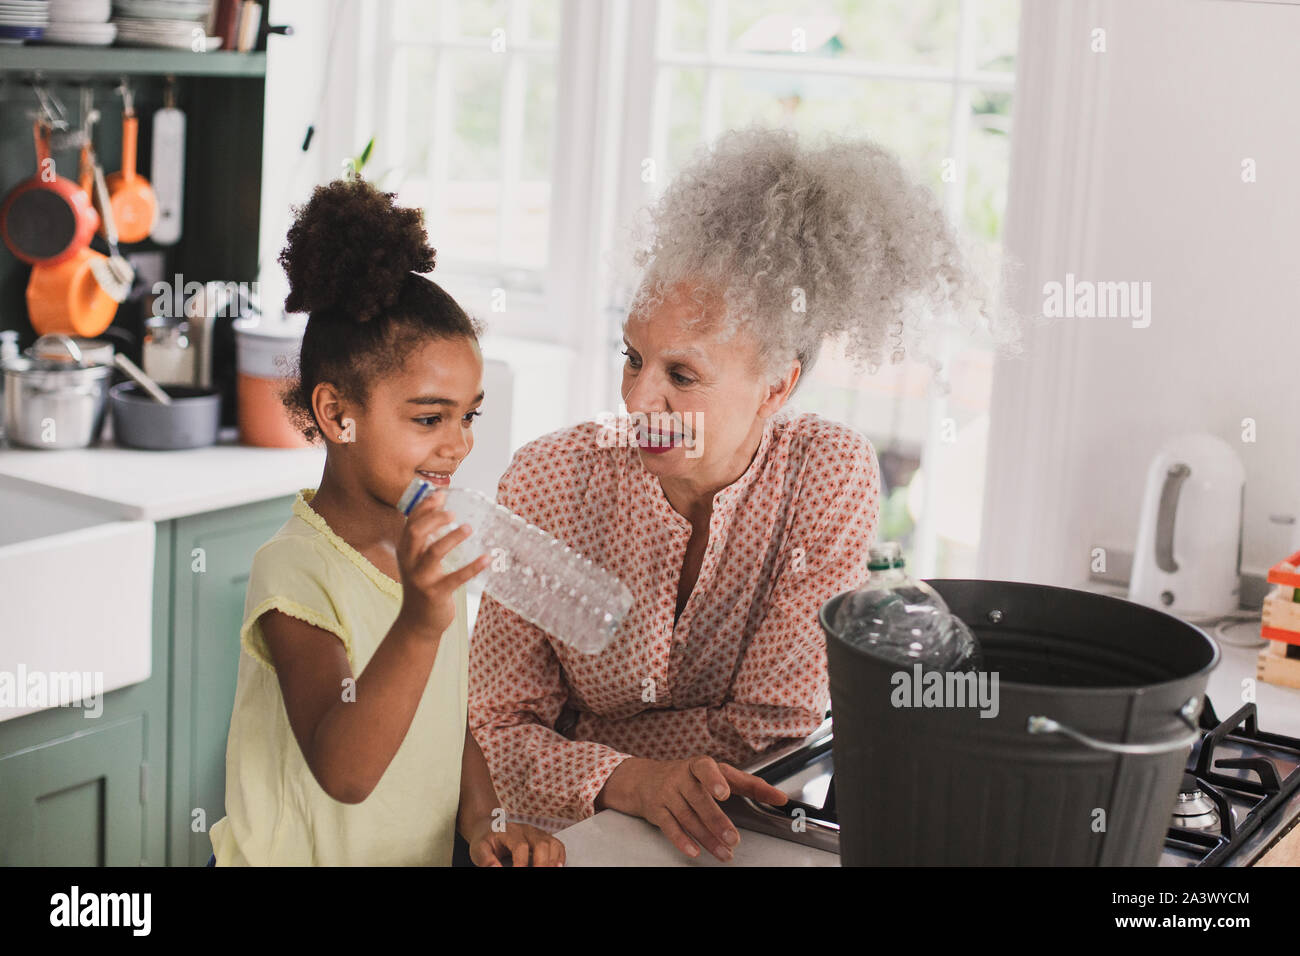 Grandmother recycling at home with granddaughter Stock Photo